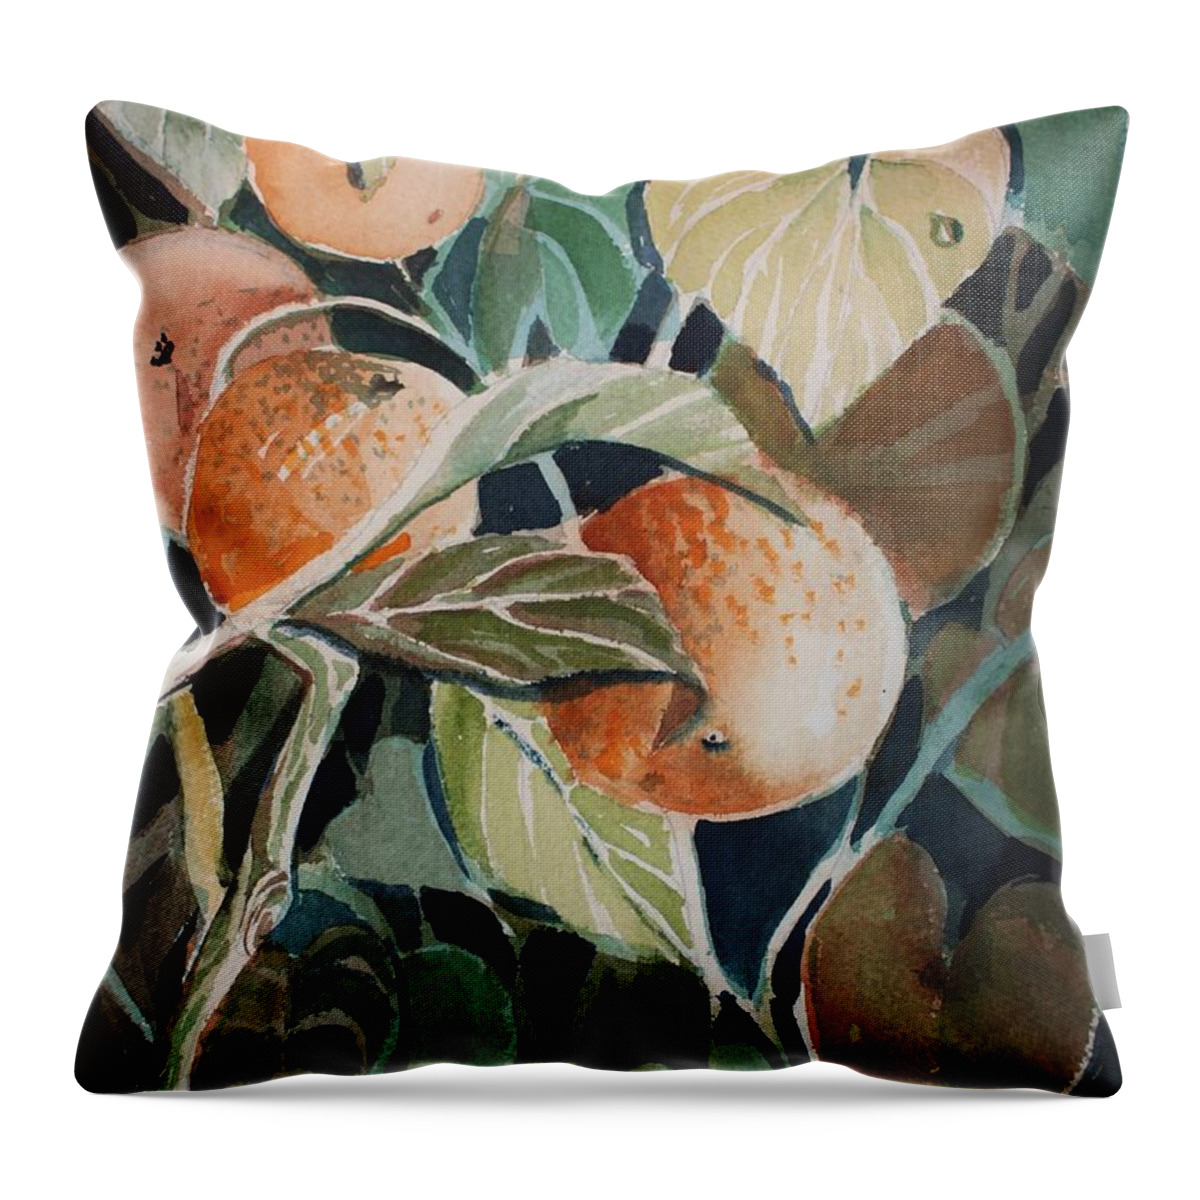 Oranges Throw Pillow featuring the painting Florida Oranges by Mindy Newman